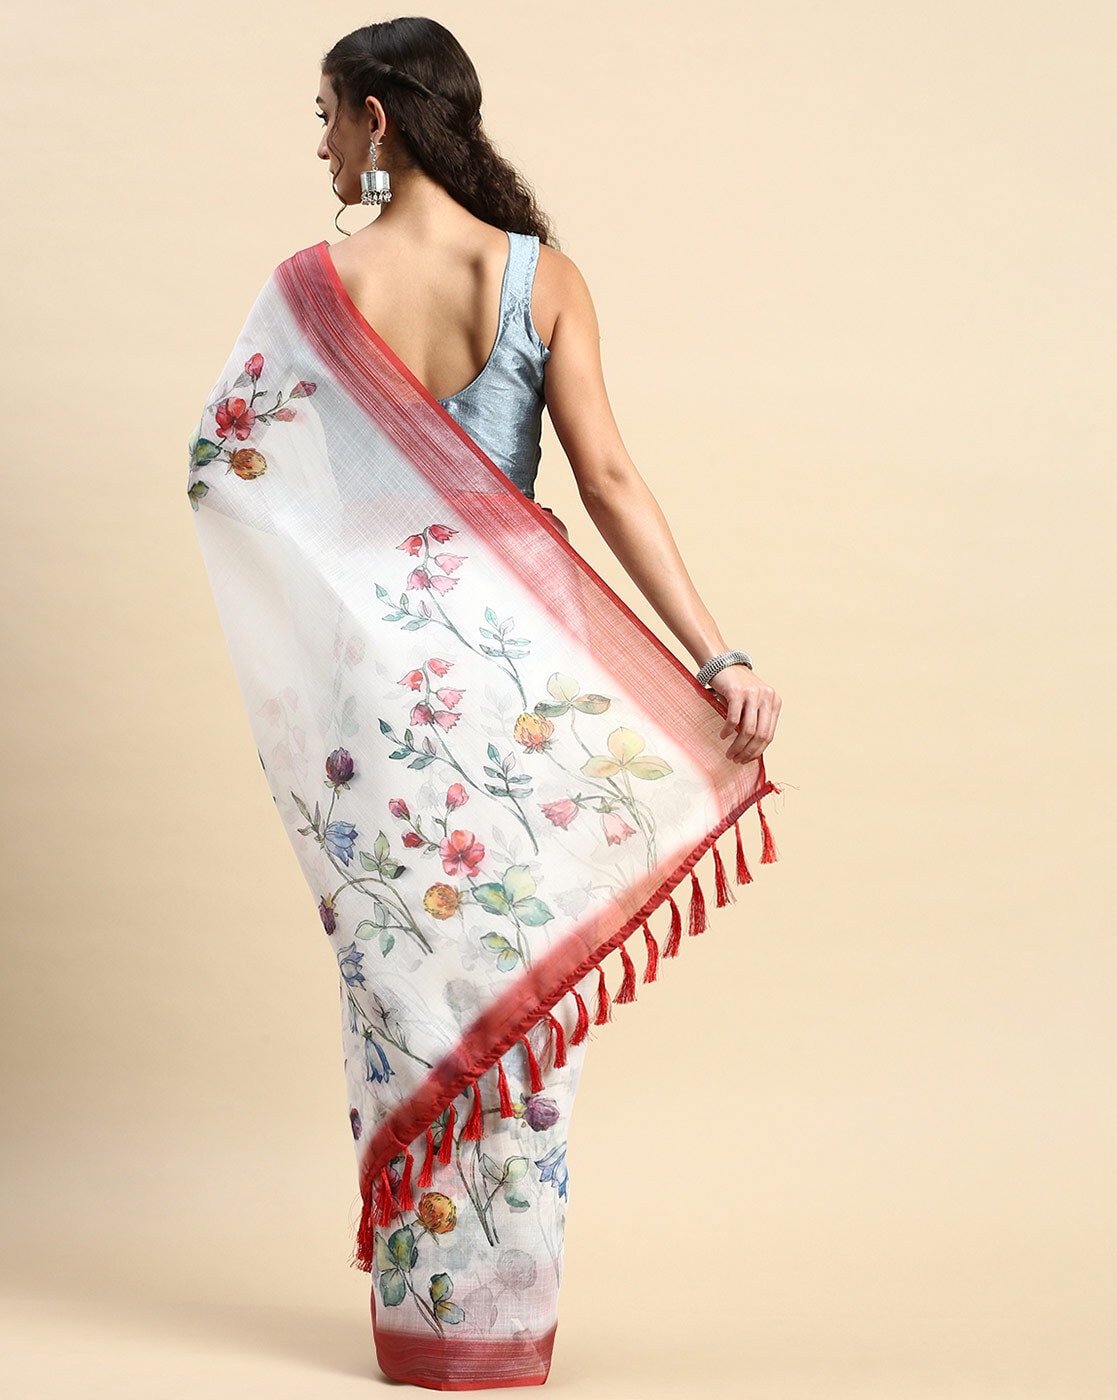 Saree Draping Software by TRI3D | Online Saree Draping Tool | Free Trial